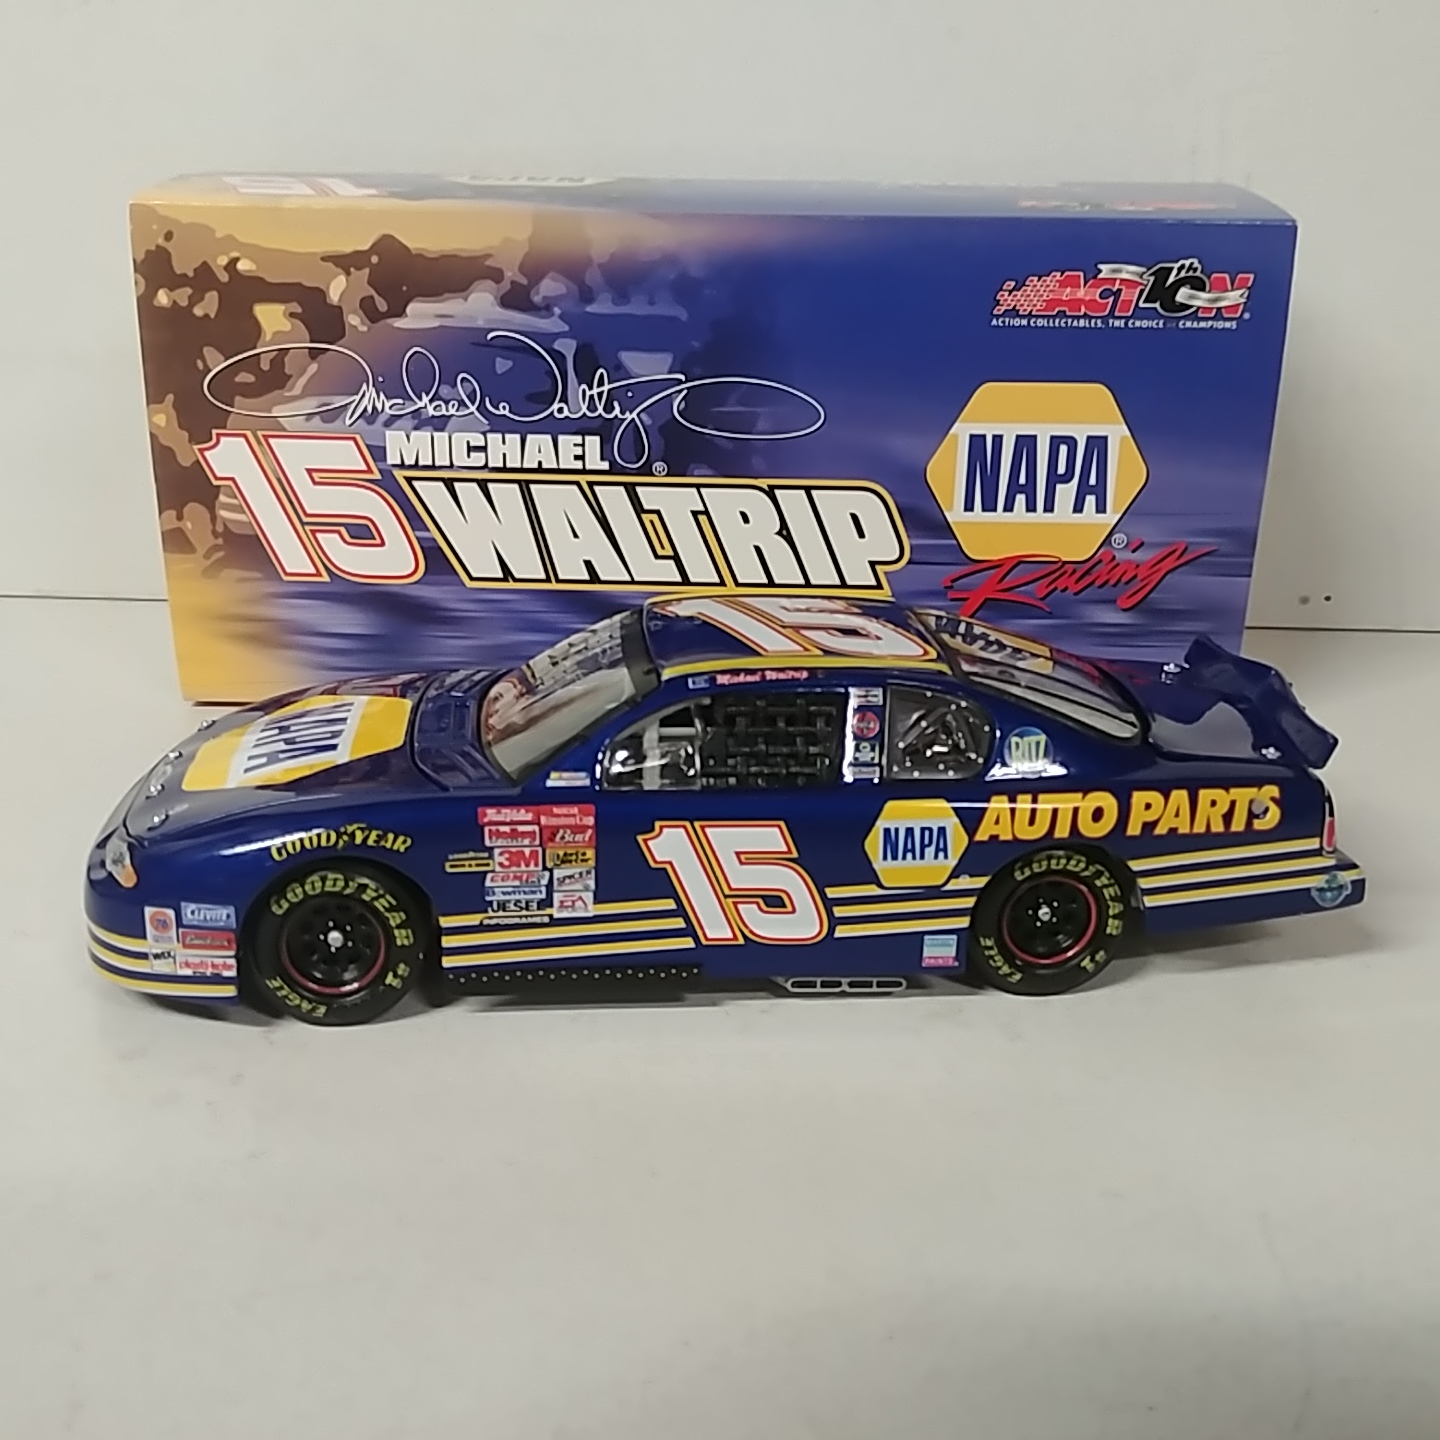 Stars & Stripes 1 24 for sale online 2002 Michael Waltrip #15 Action Napa 